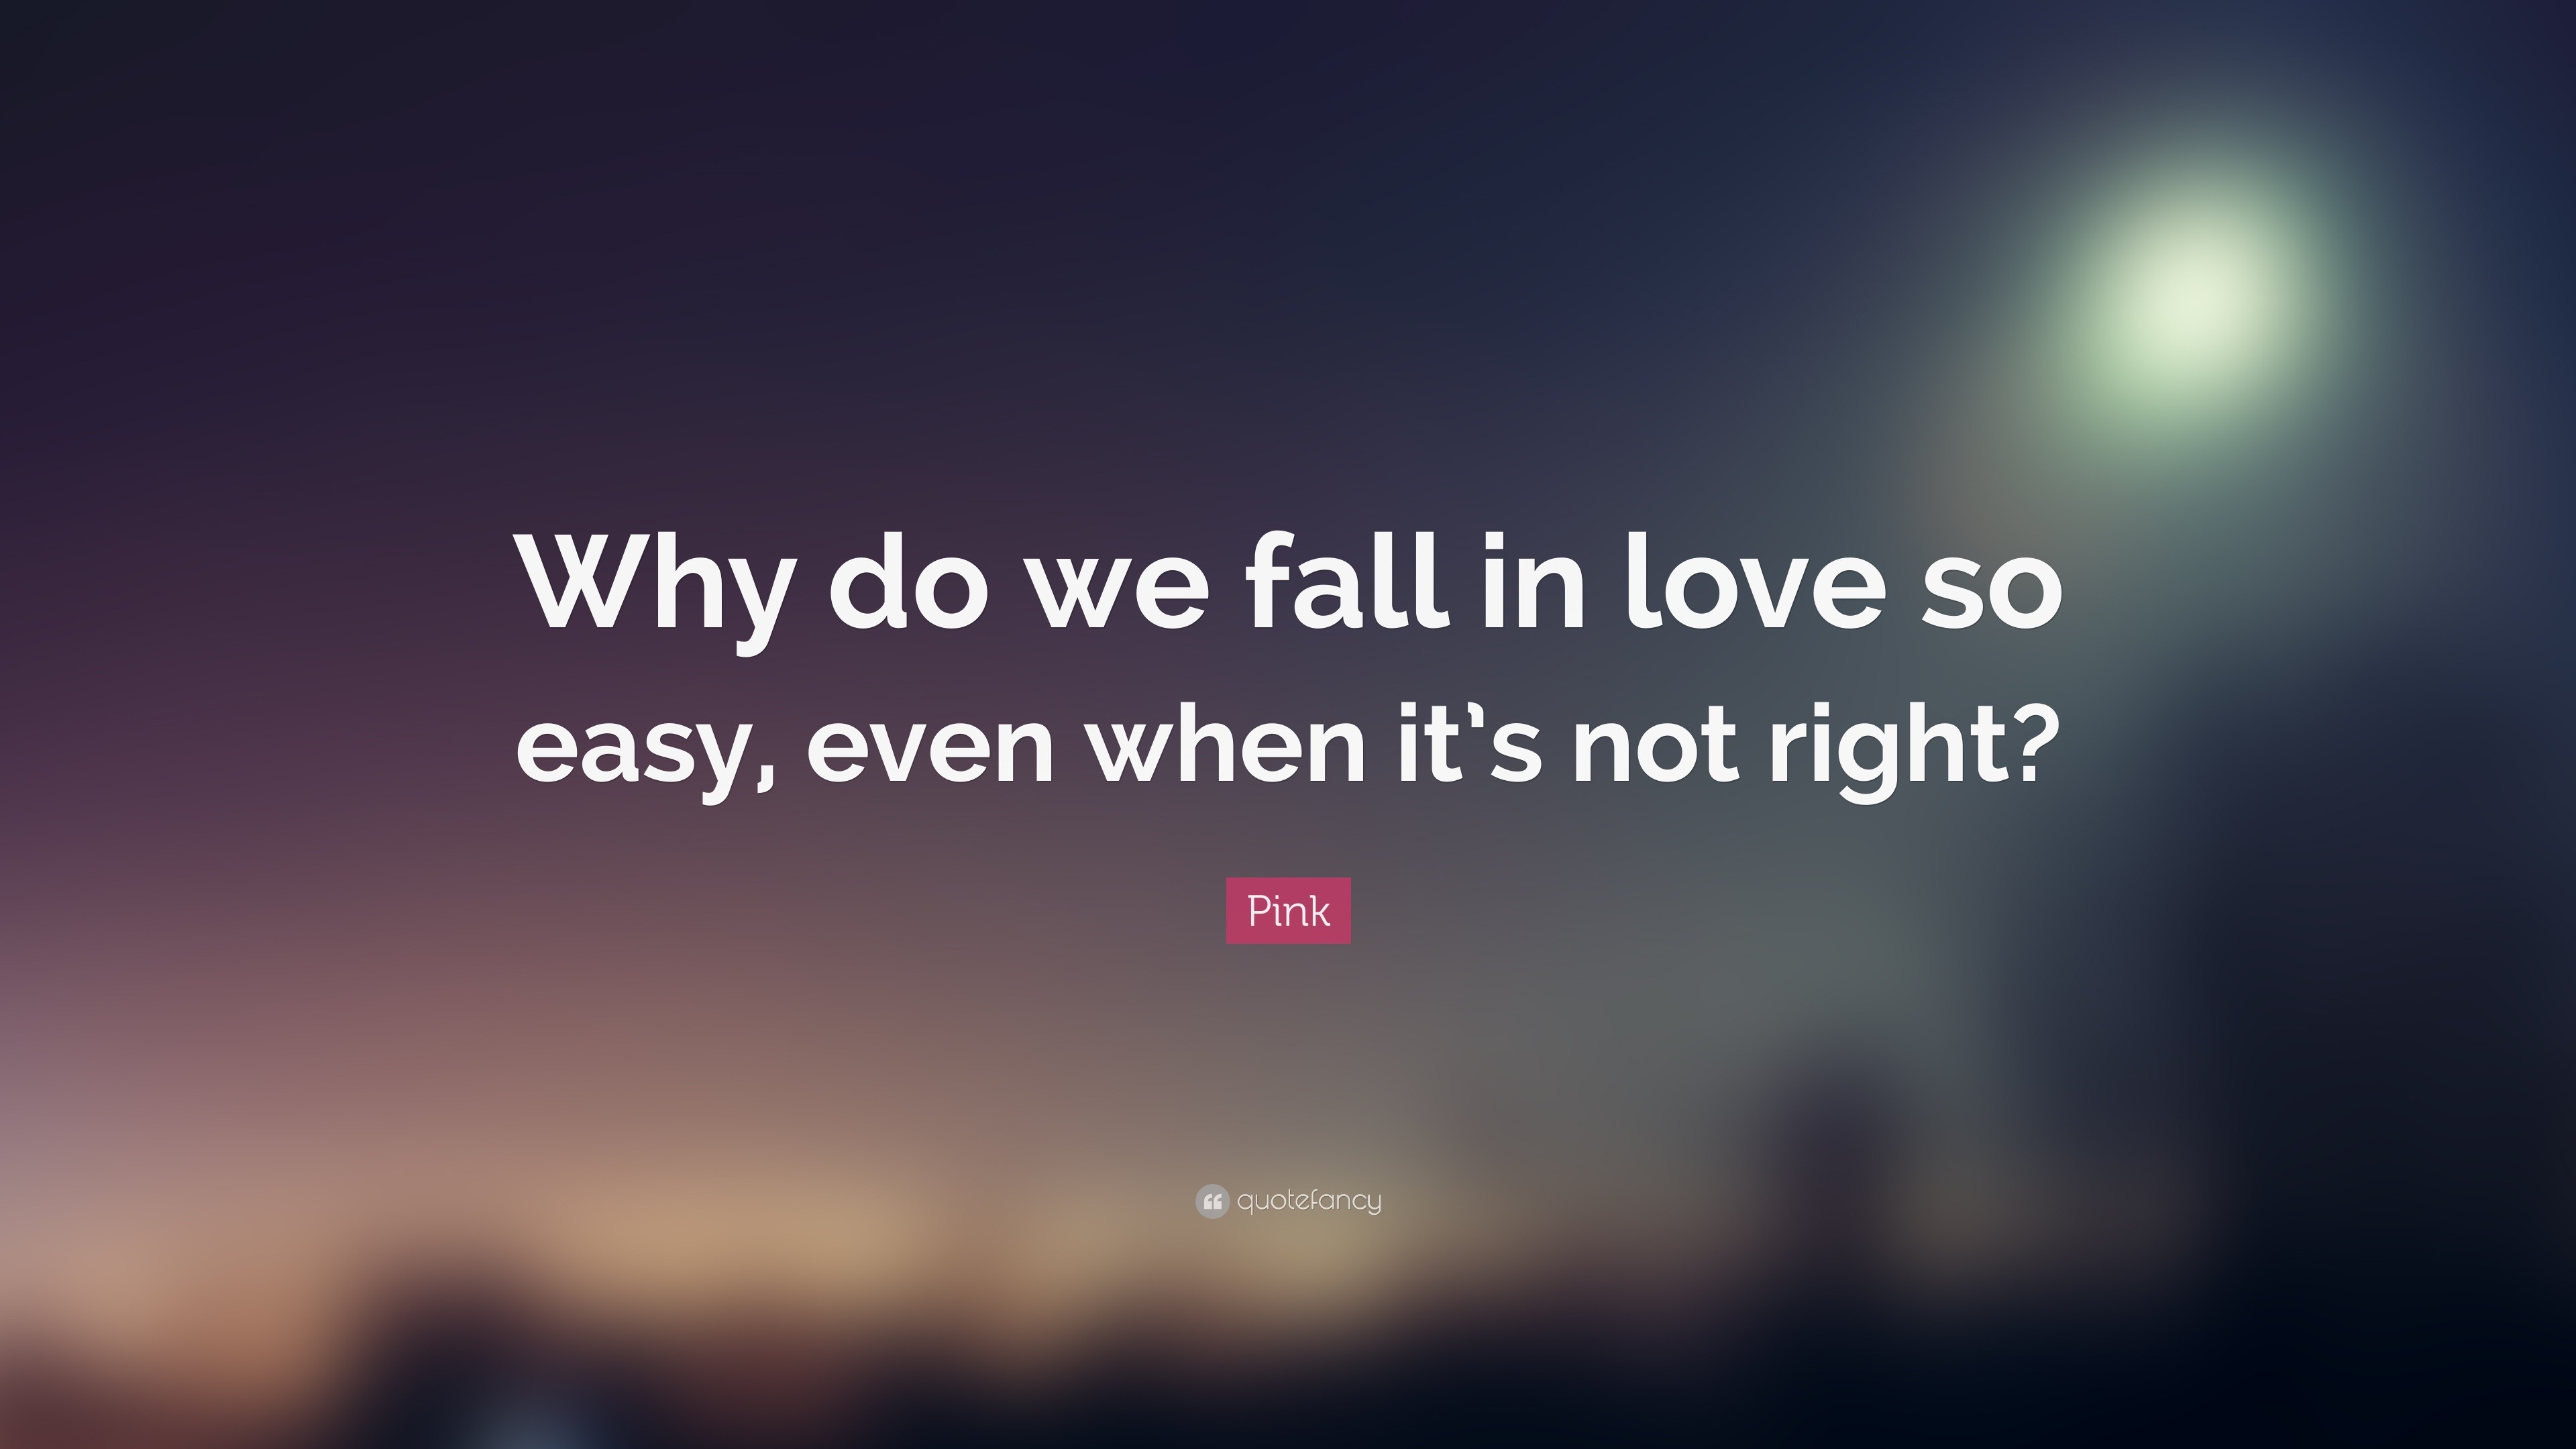 Pink Quote “Why do we fall in love so easy even when it s